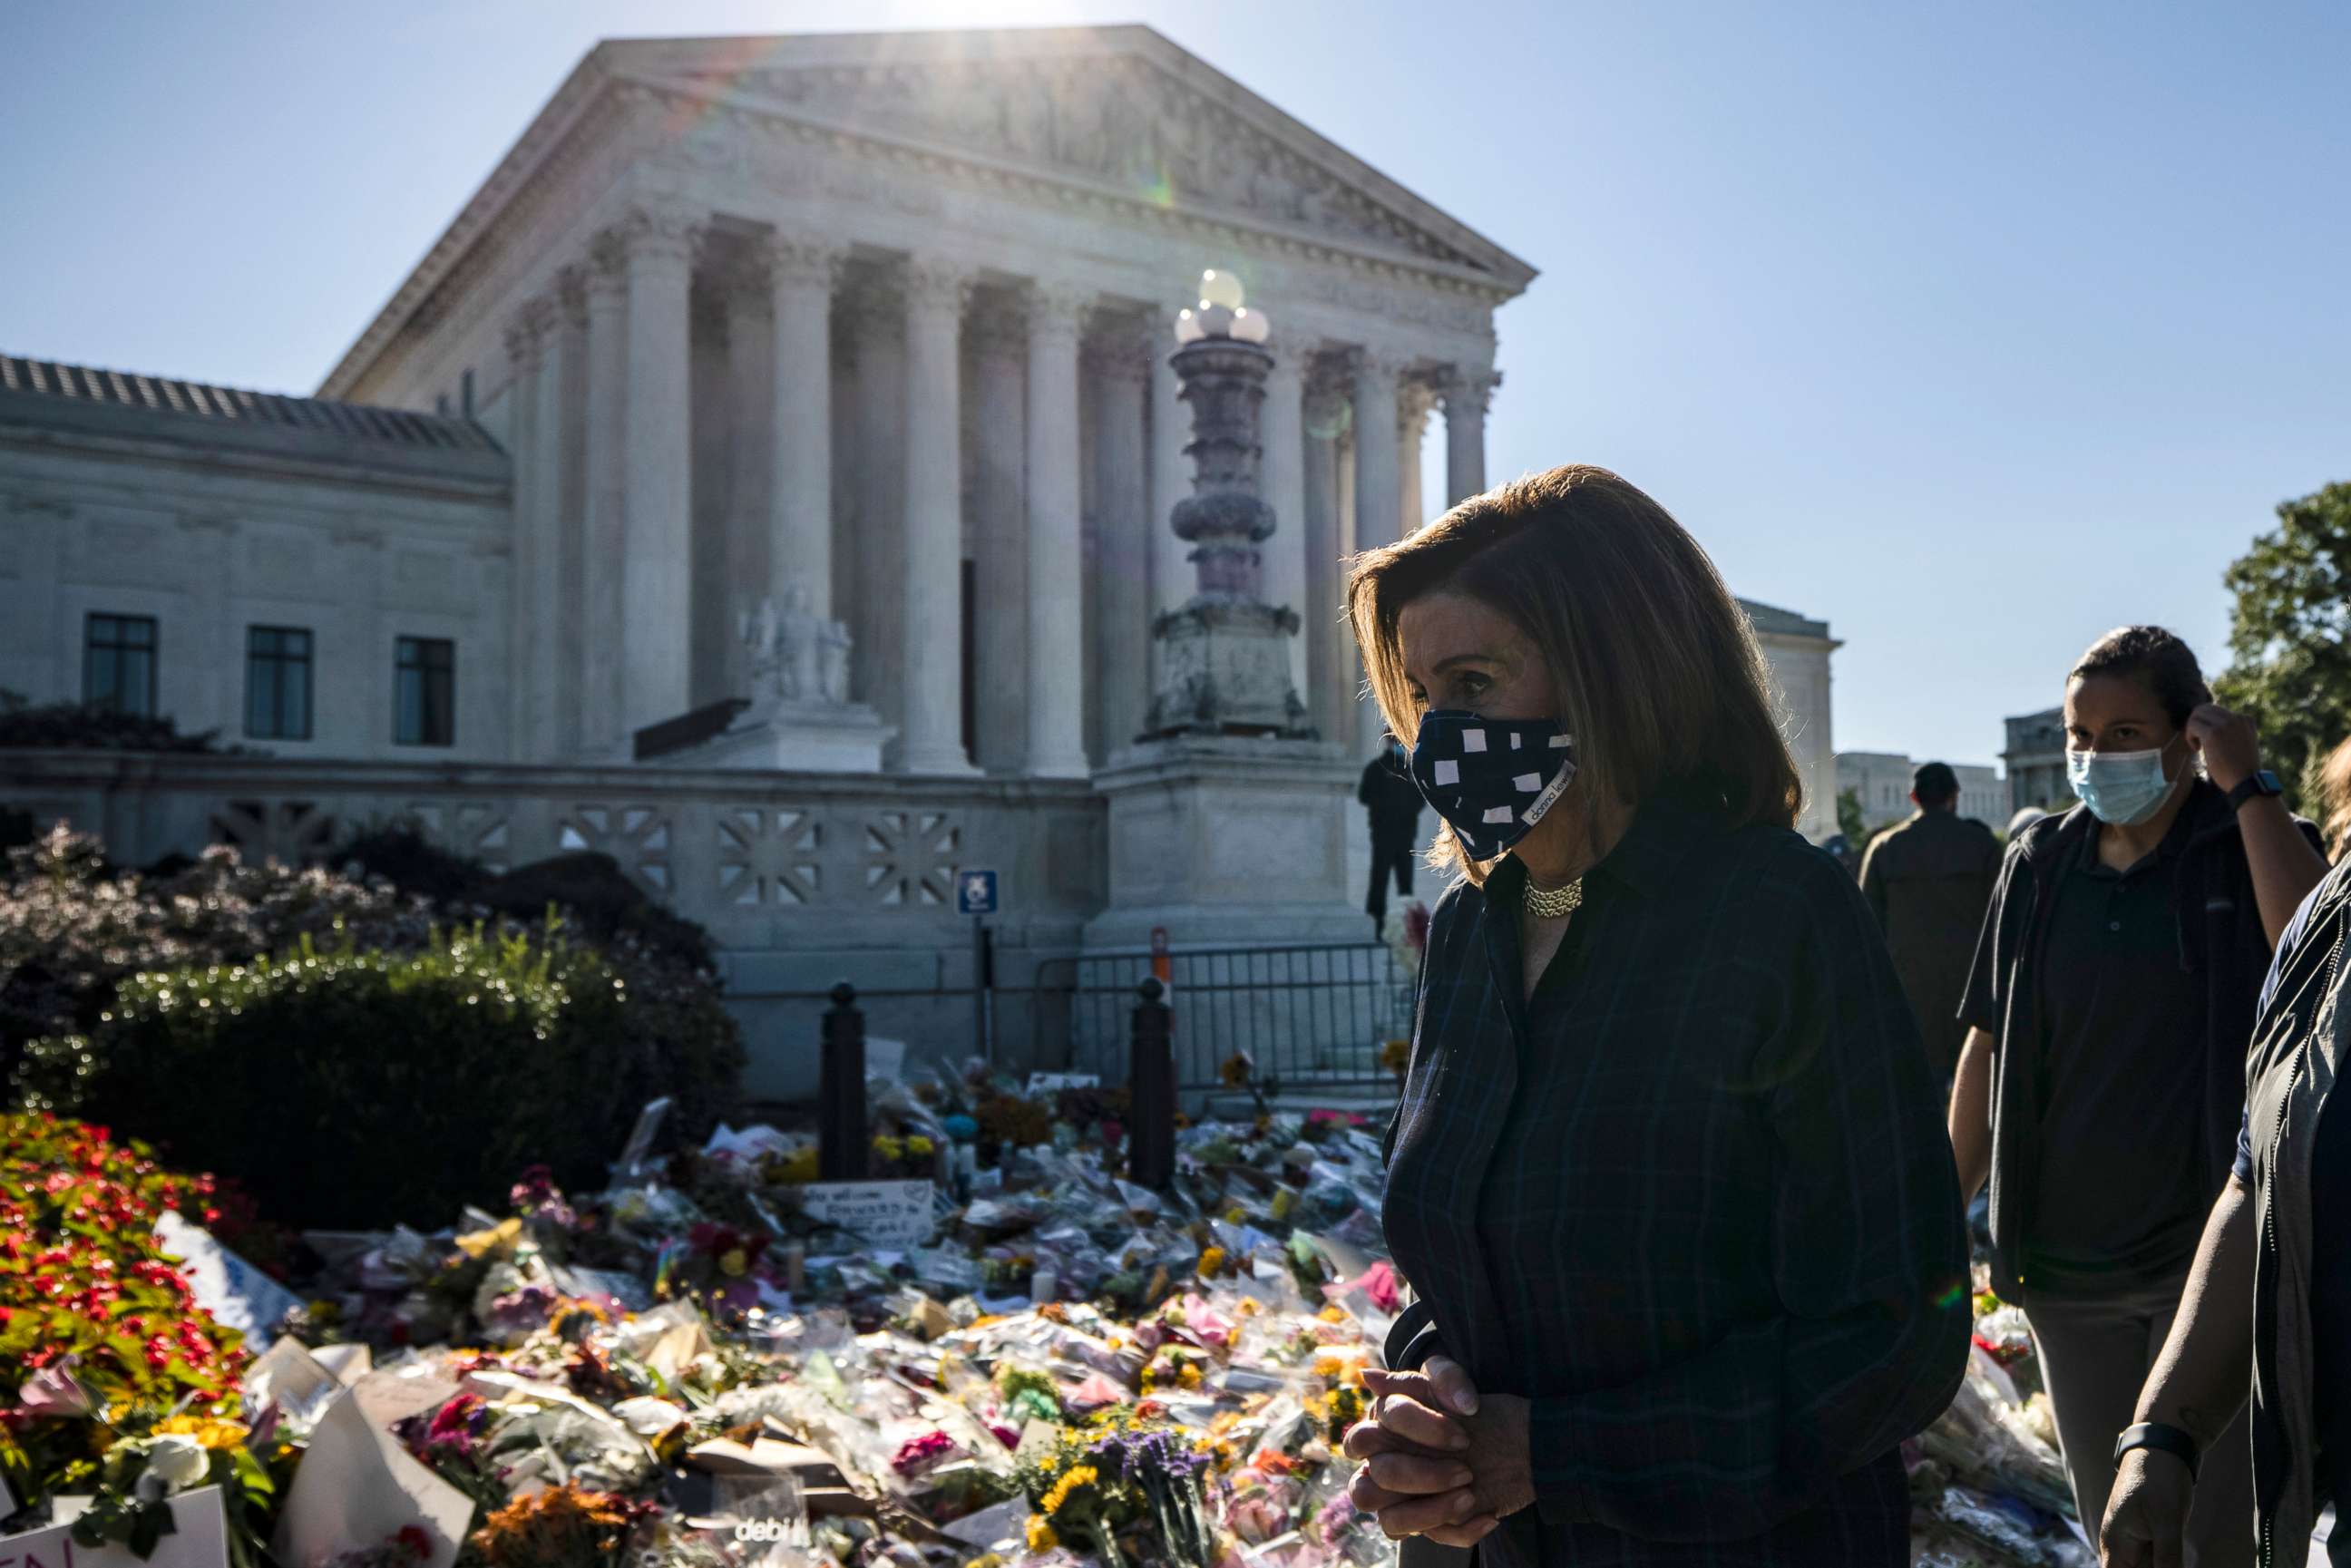 PHOTO: Speaker of the House Nancy Pelosi arrives to pay her respects at the makeshift memorial for Justice Ruth Bader Ginsburg in front of the US Supreme Court, Sept. 20, 2020 in Washington.